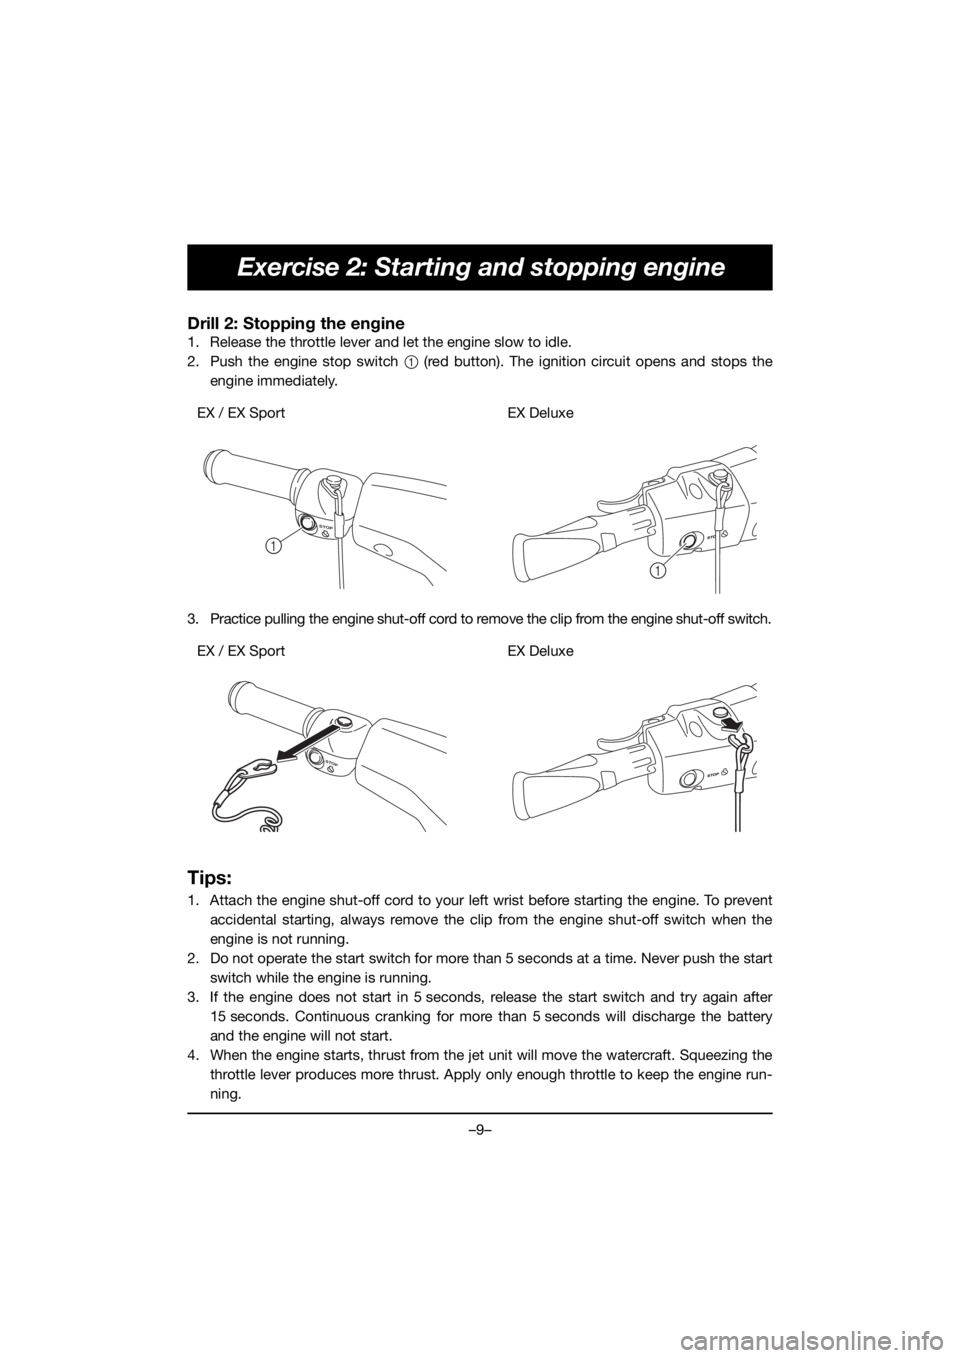 YAMAHA EX SPORT 2020  Notices Demploi (in French) –9–
Exercise 2: Starting and stopping engine
Drill 2: Stopping the engine
1. Release the throttle lever and let the engine slow to idle.
2. Push the engine stop switch 1 (red button). The ignition